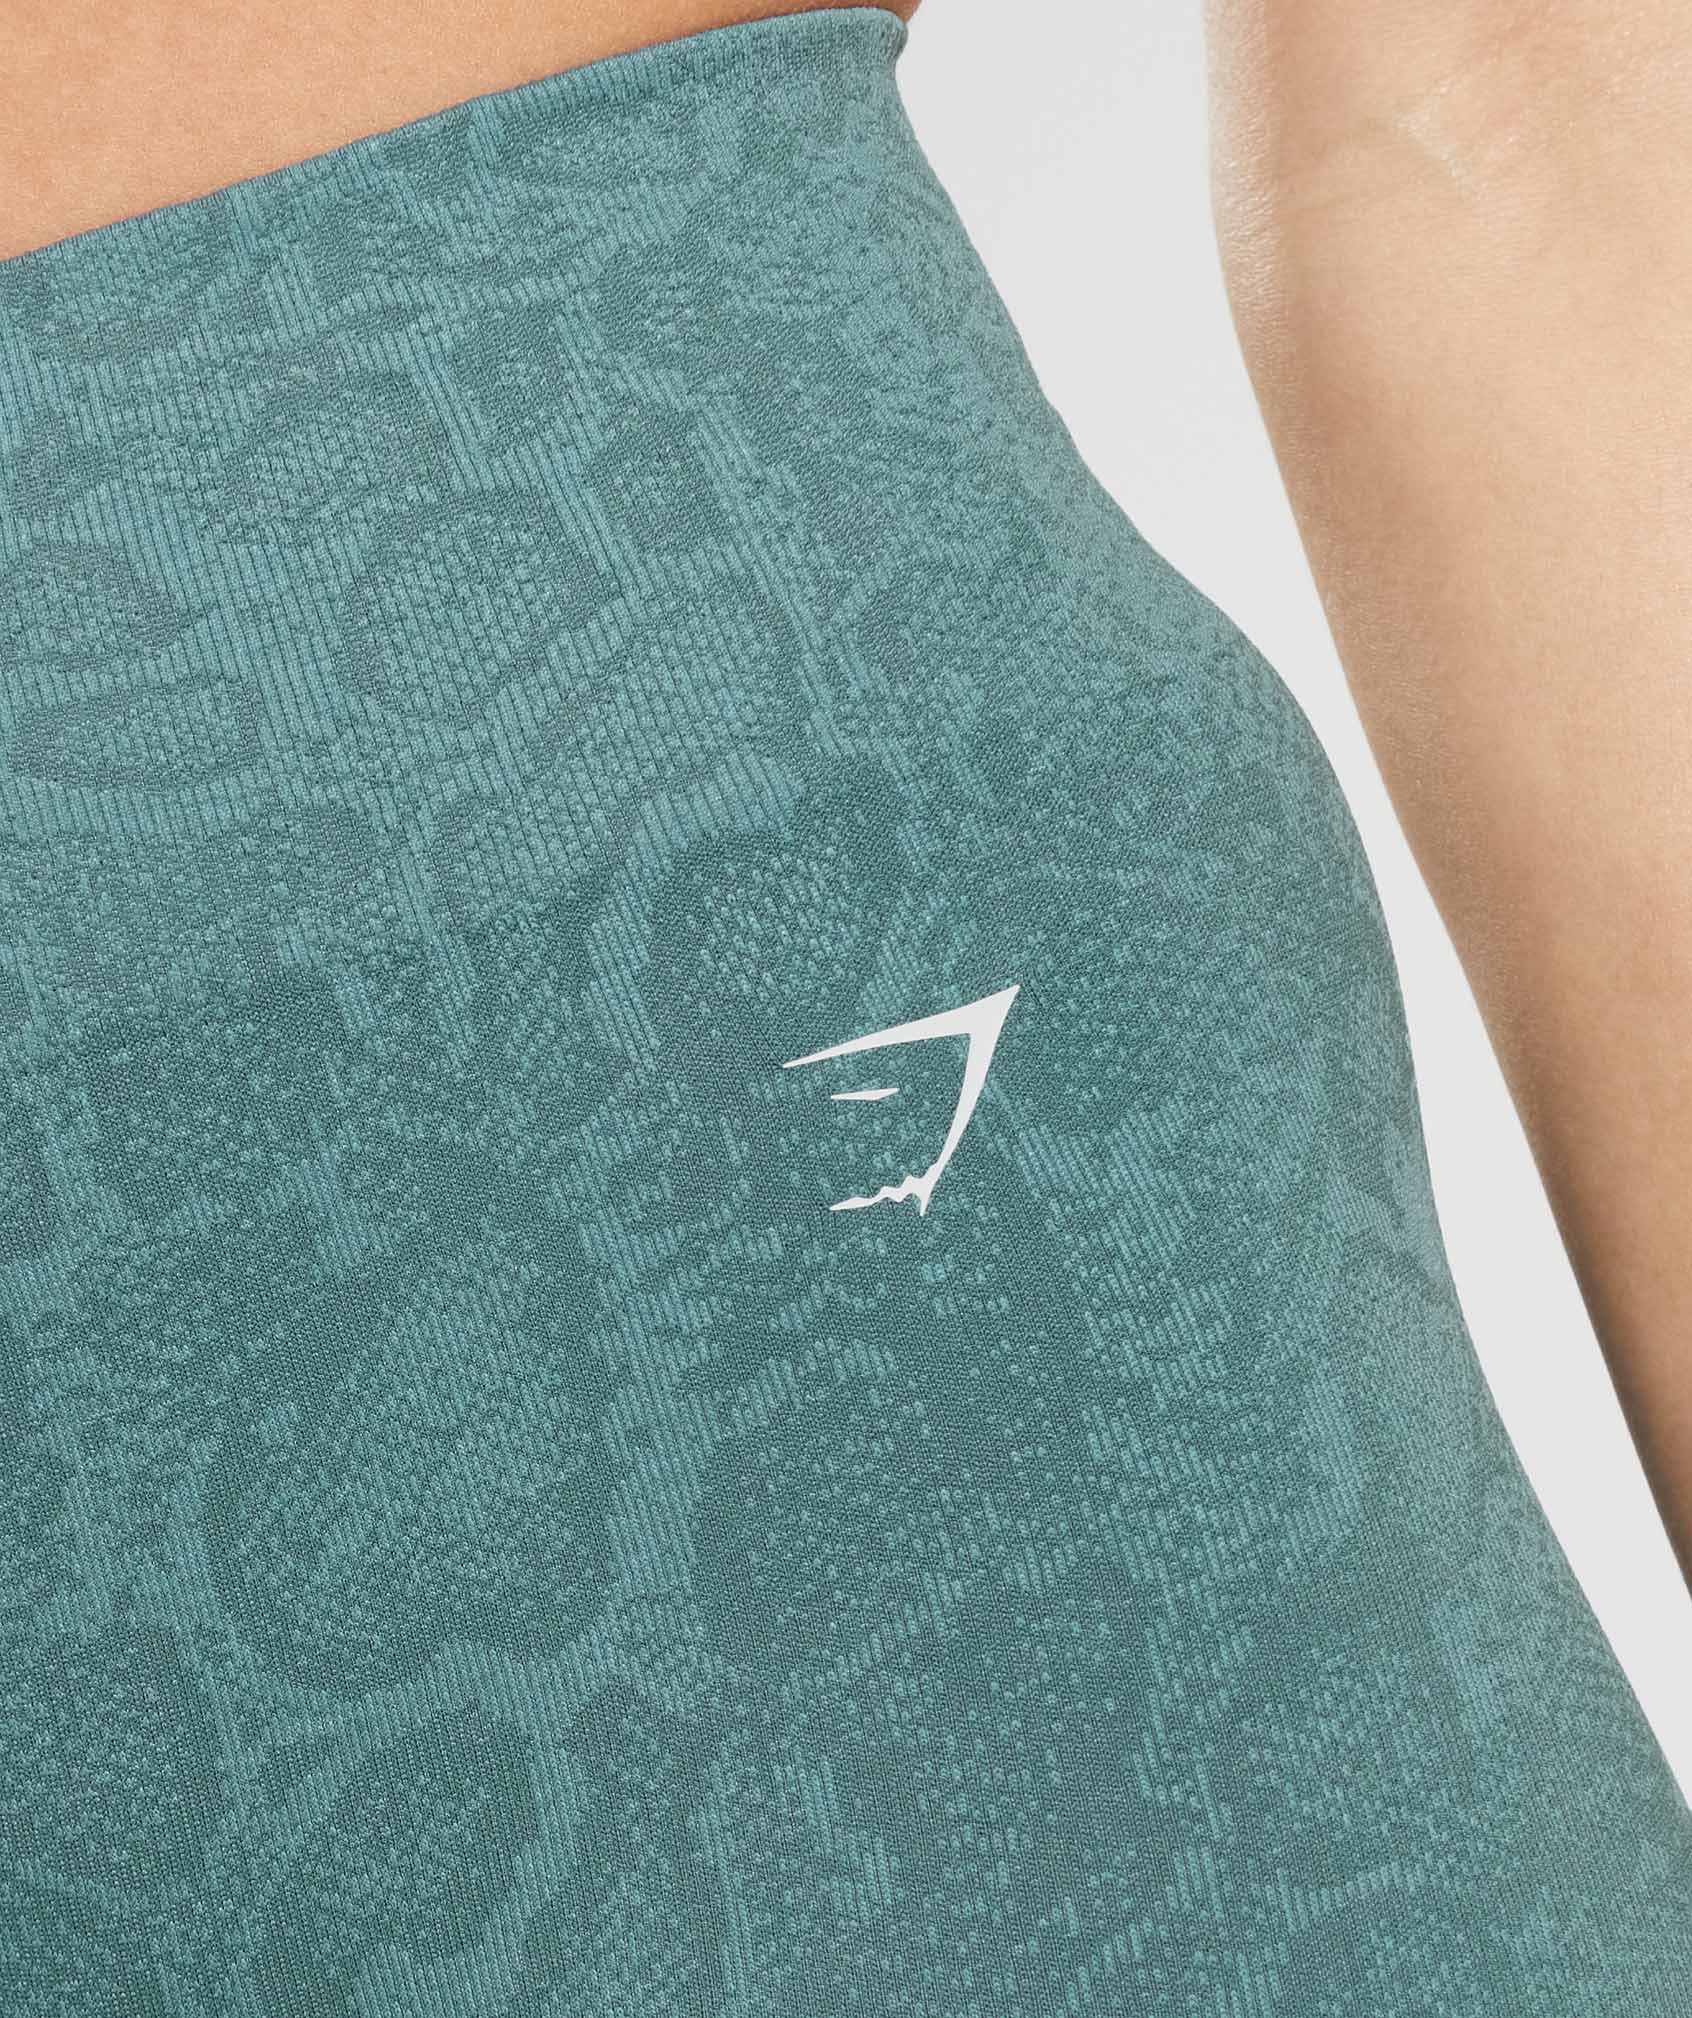 Adapt Animal Seamless Cycling Shorts in Iceberg Blue/Thunder Blue - view 5